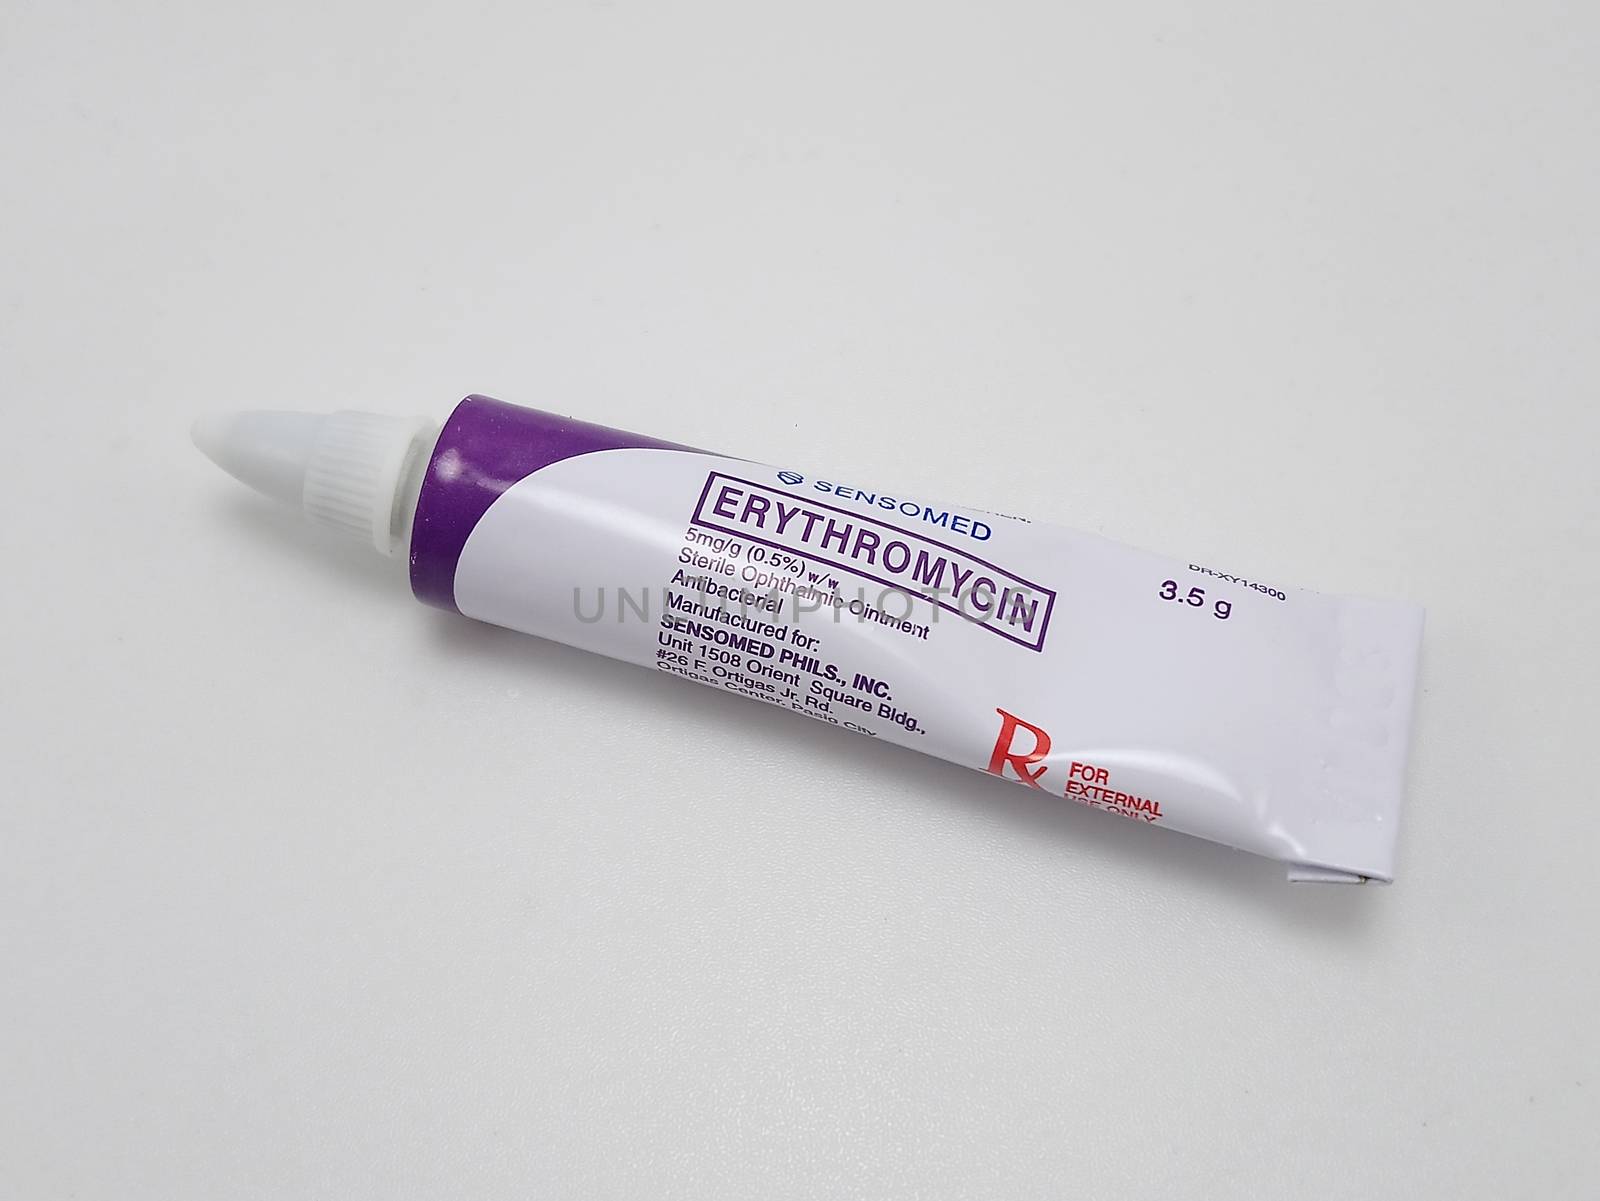 Sensomed erythromycin ointment tube in Manila, Philippines by imwaltersy